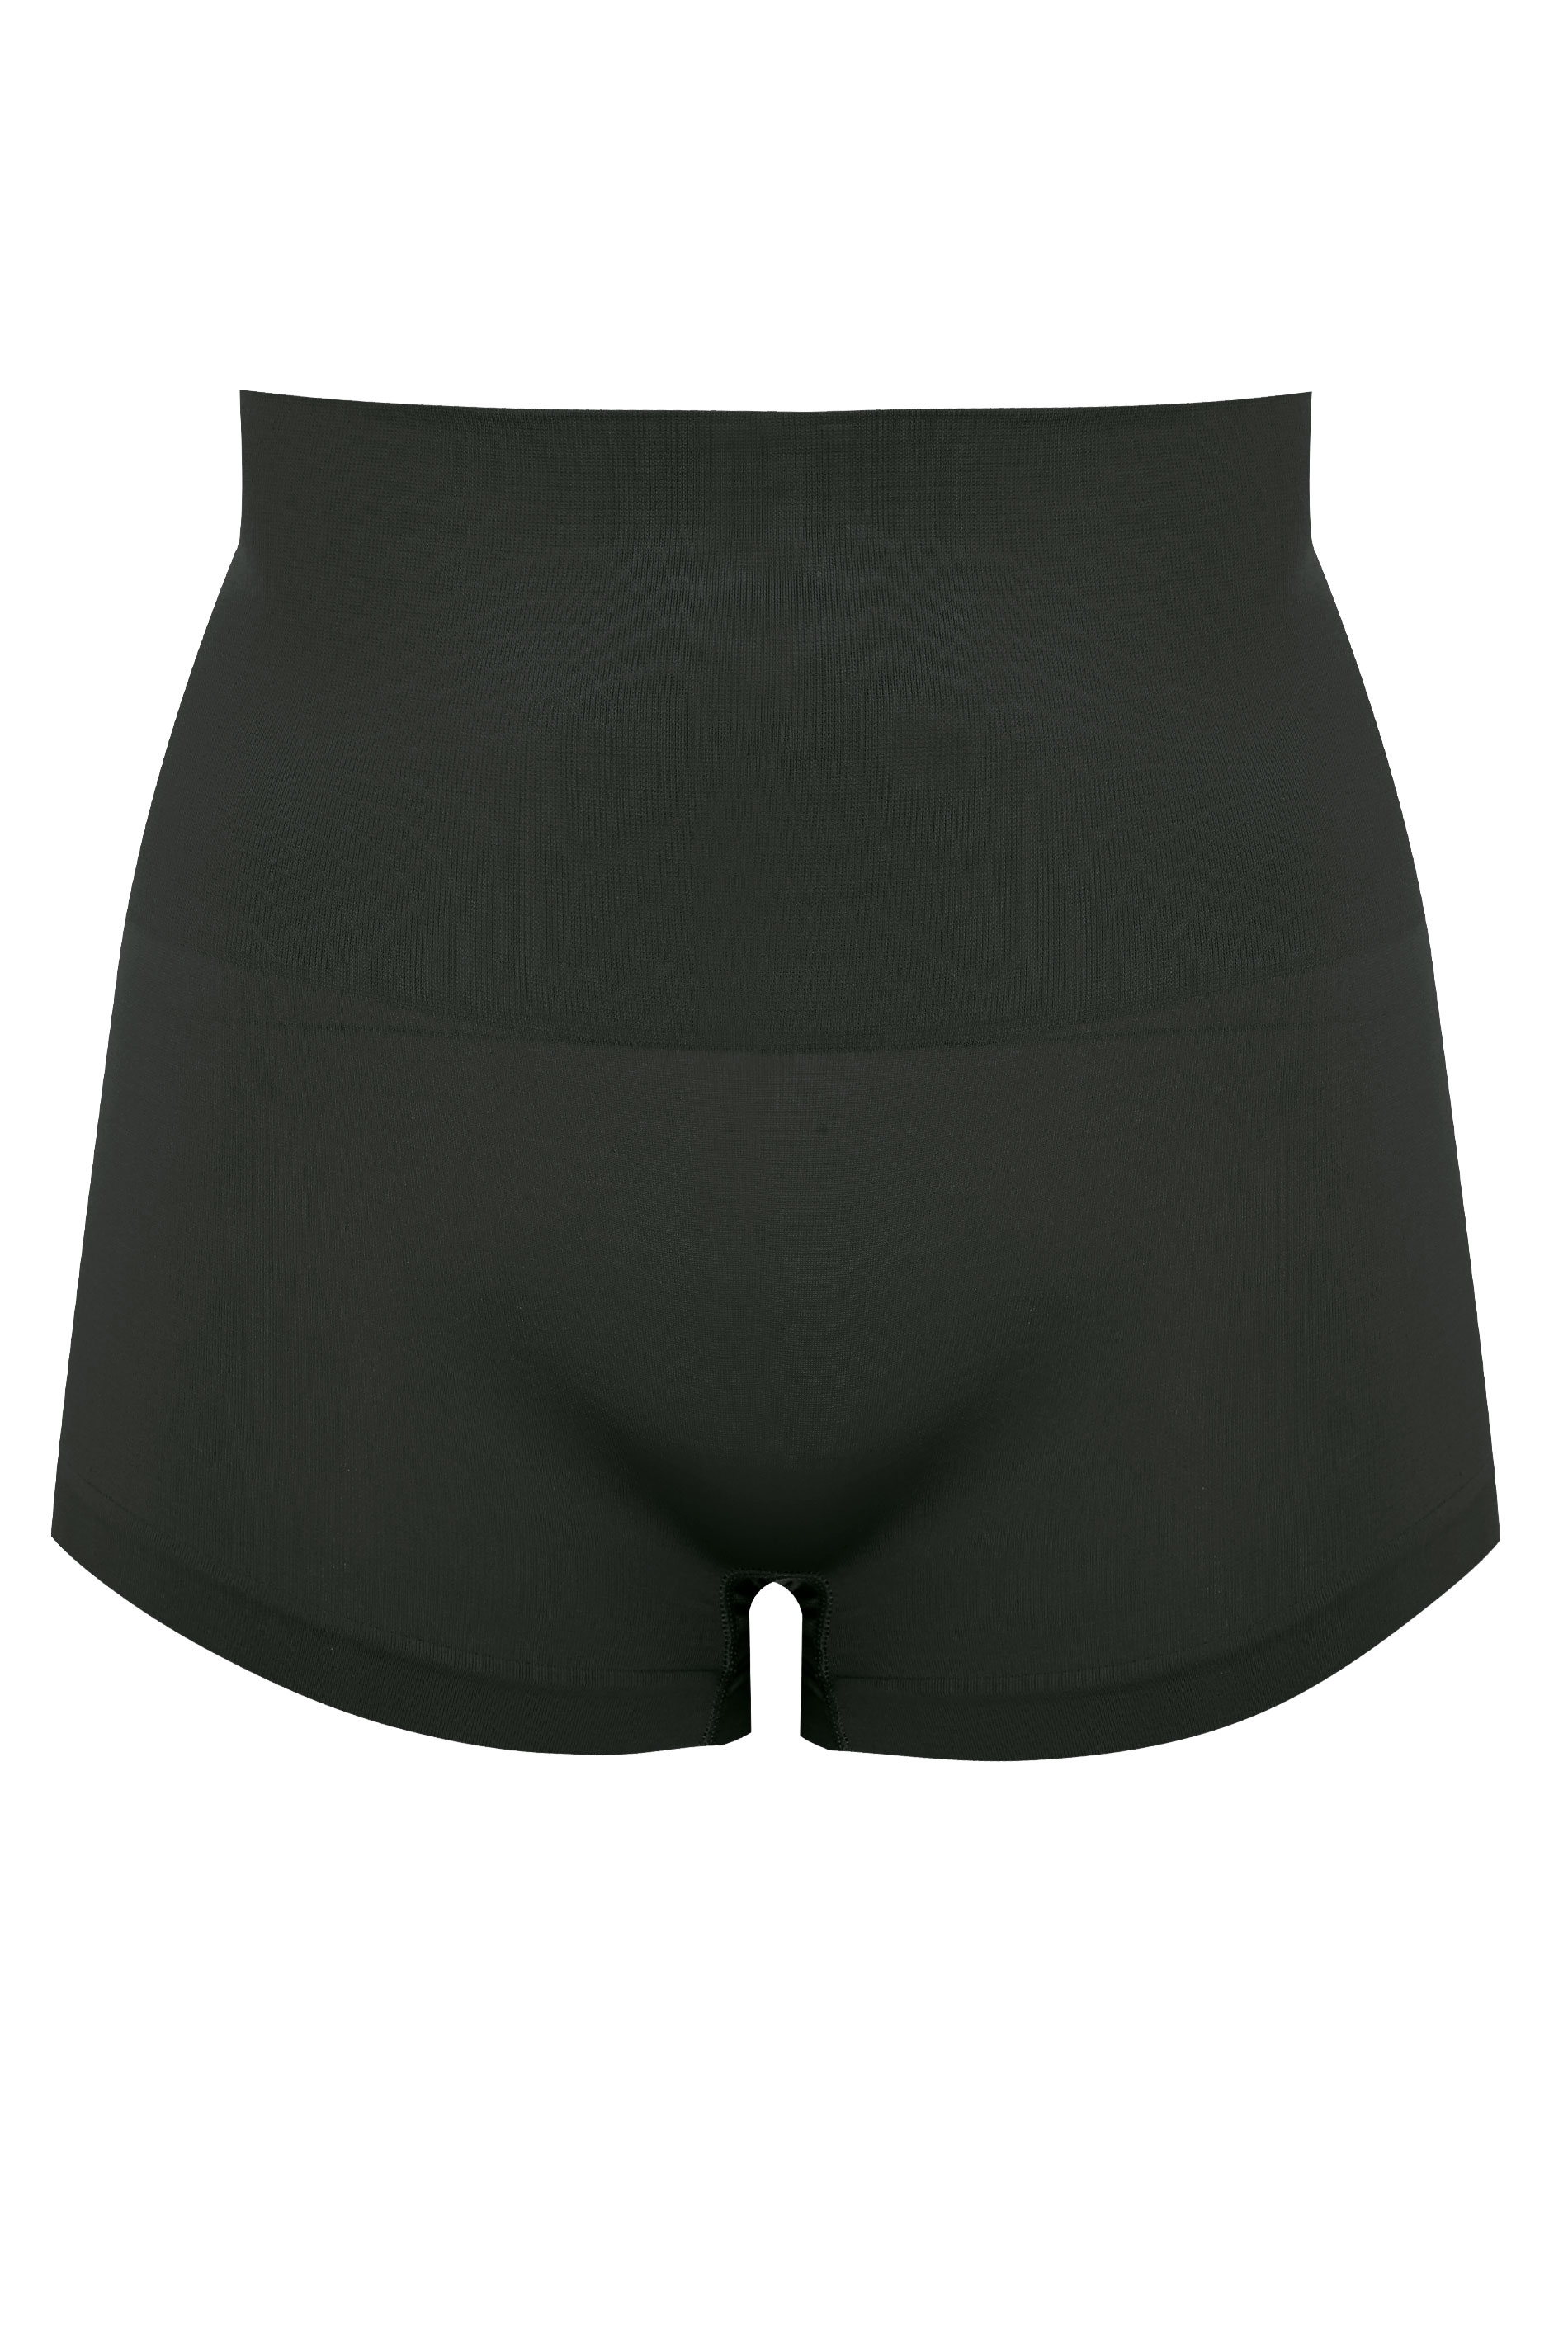 Plus Size Black Seamless Control High Waisted Shorts | Yours Clothing 3